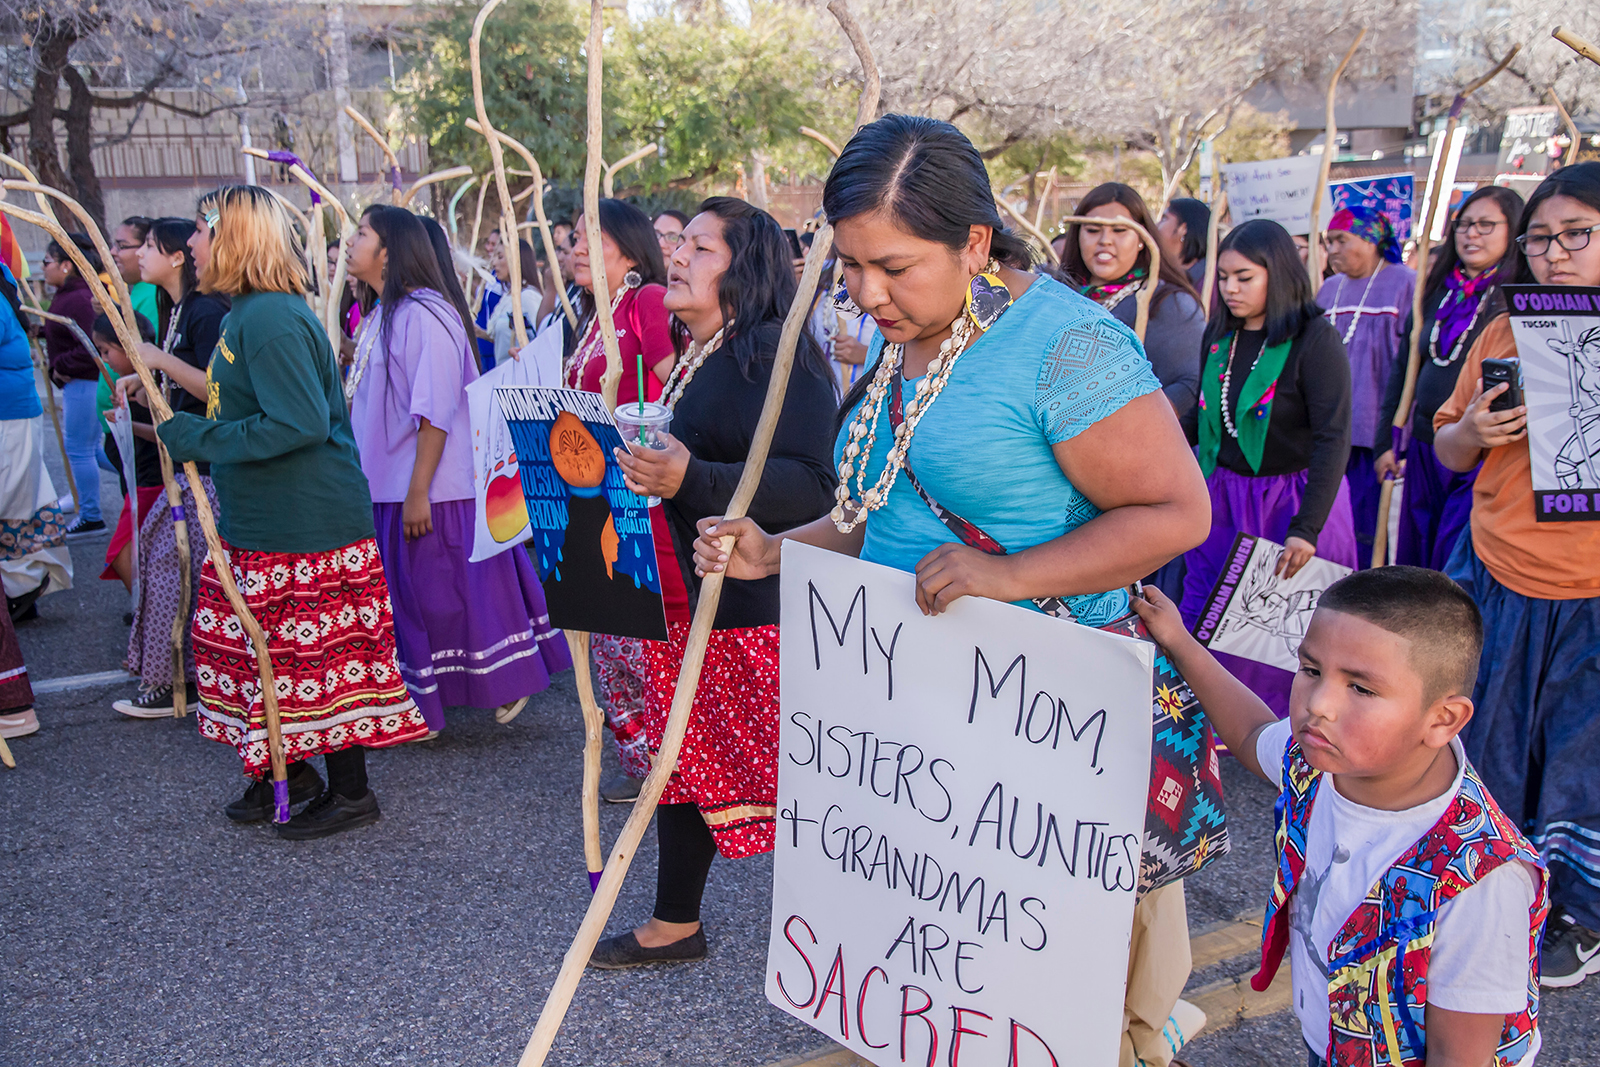 Indigenous women lead the Tucson 2019 Women’s March in Tucson, Arizona. Photo by Dulcey Lima/Unsplash/Creative Commons